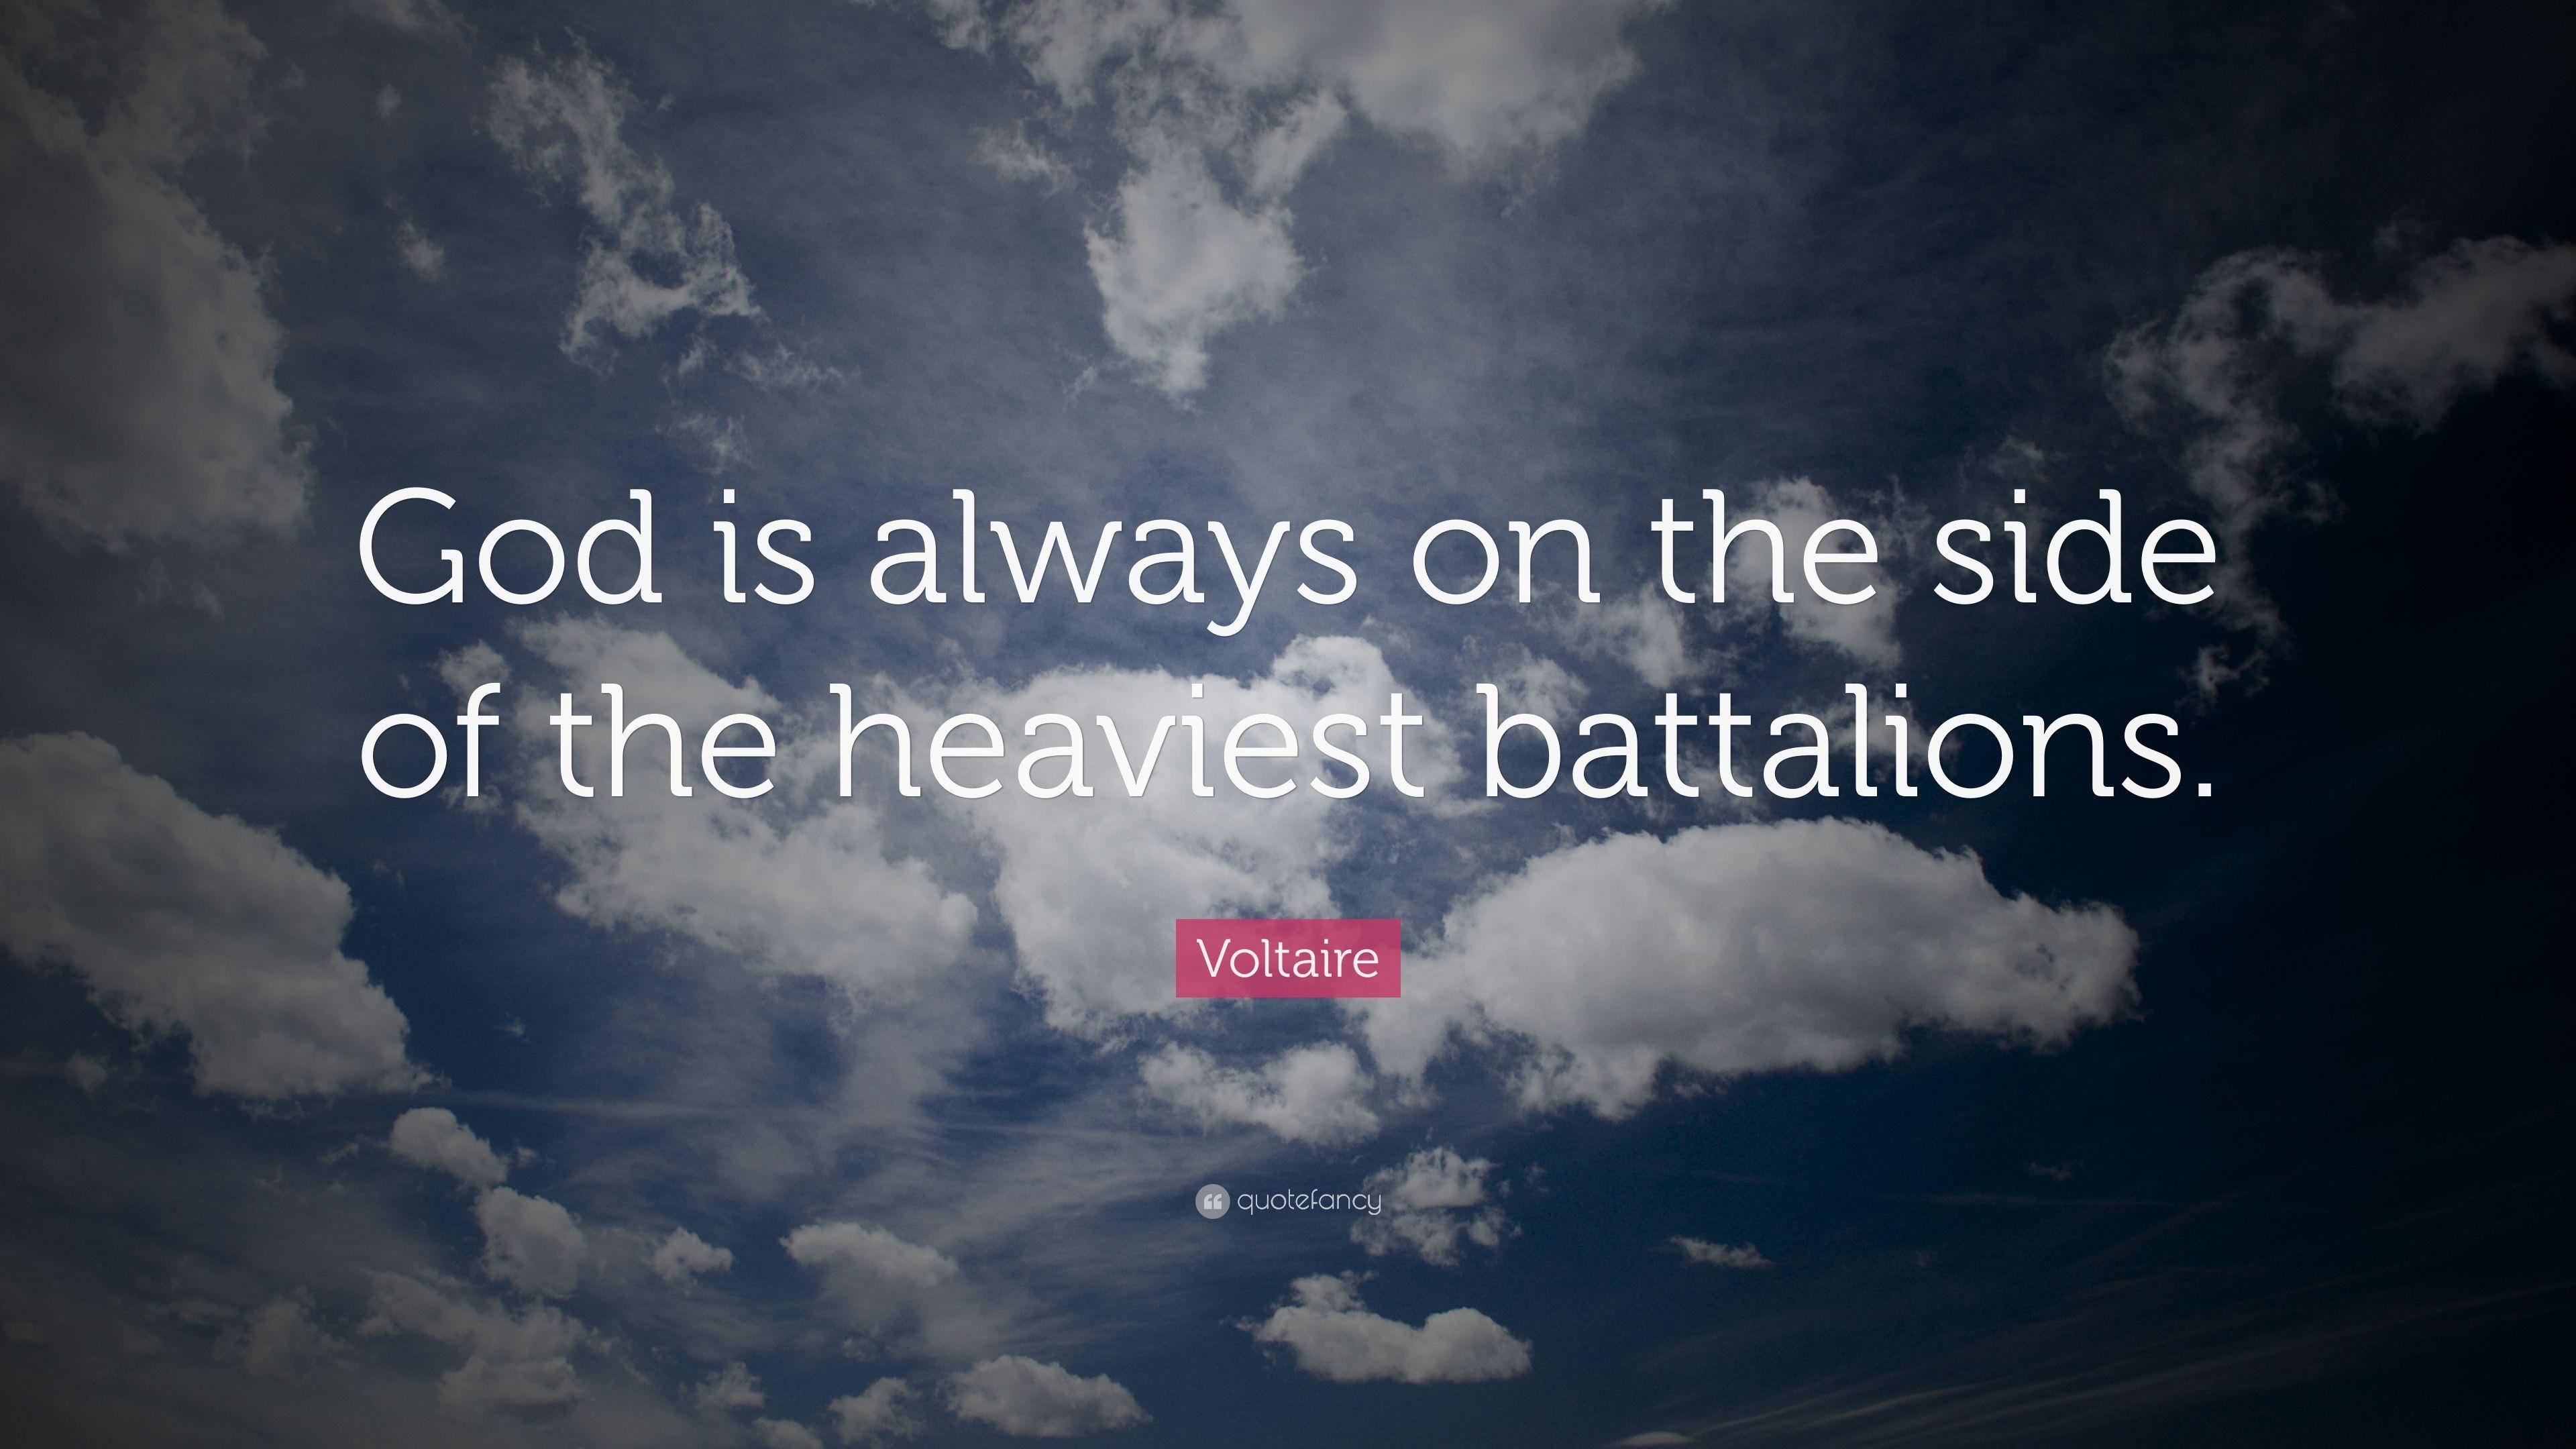 Voltaire Quote: “God is always on the side of the heaviest